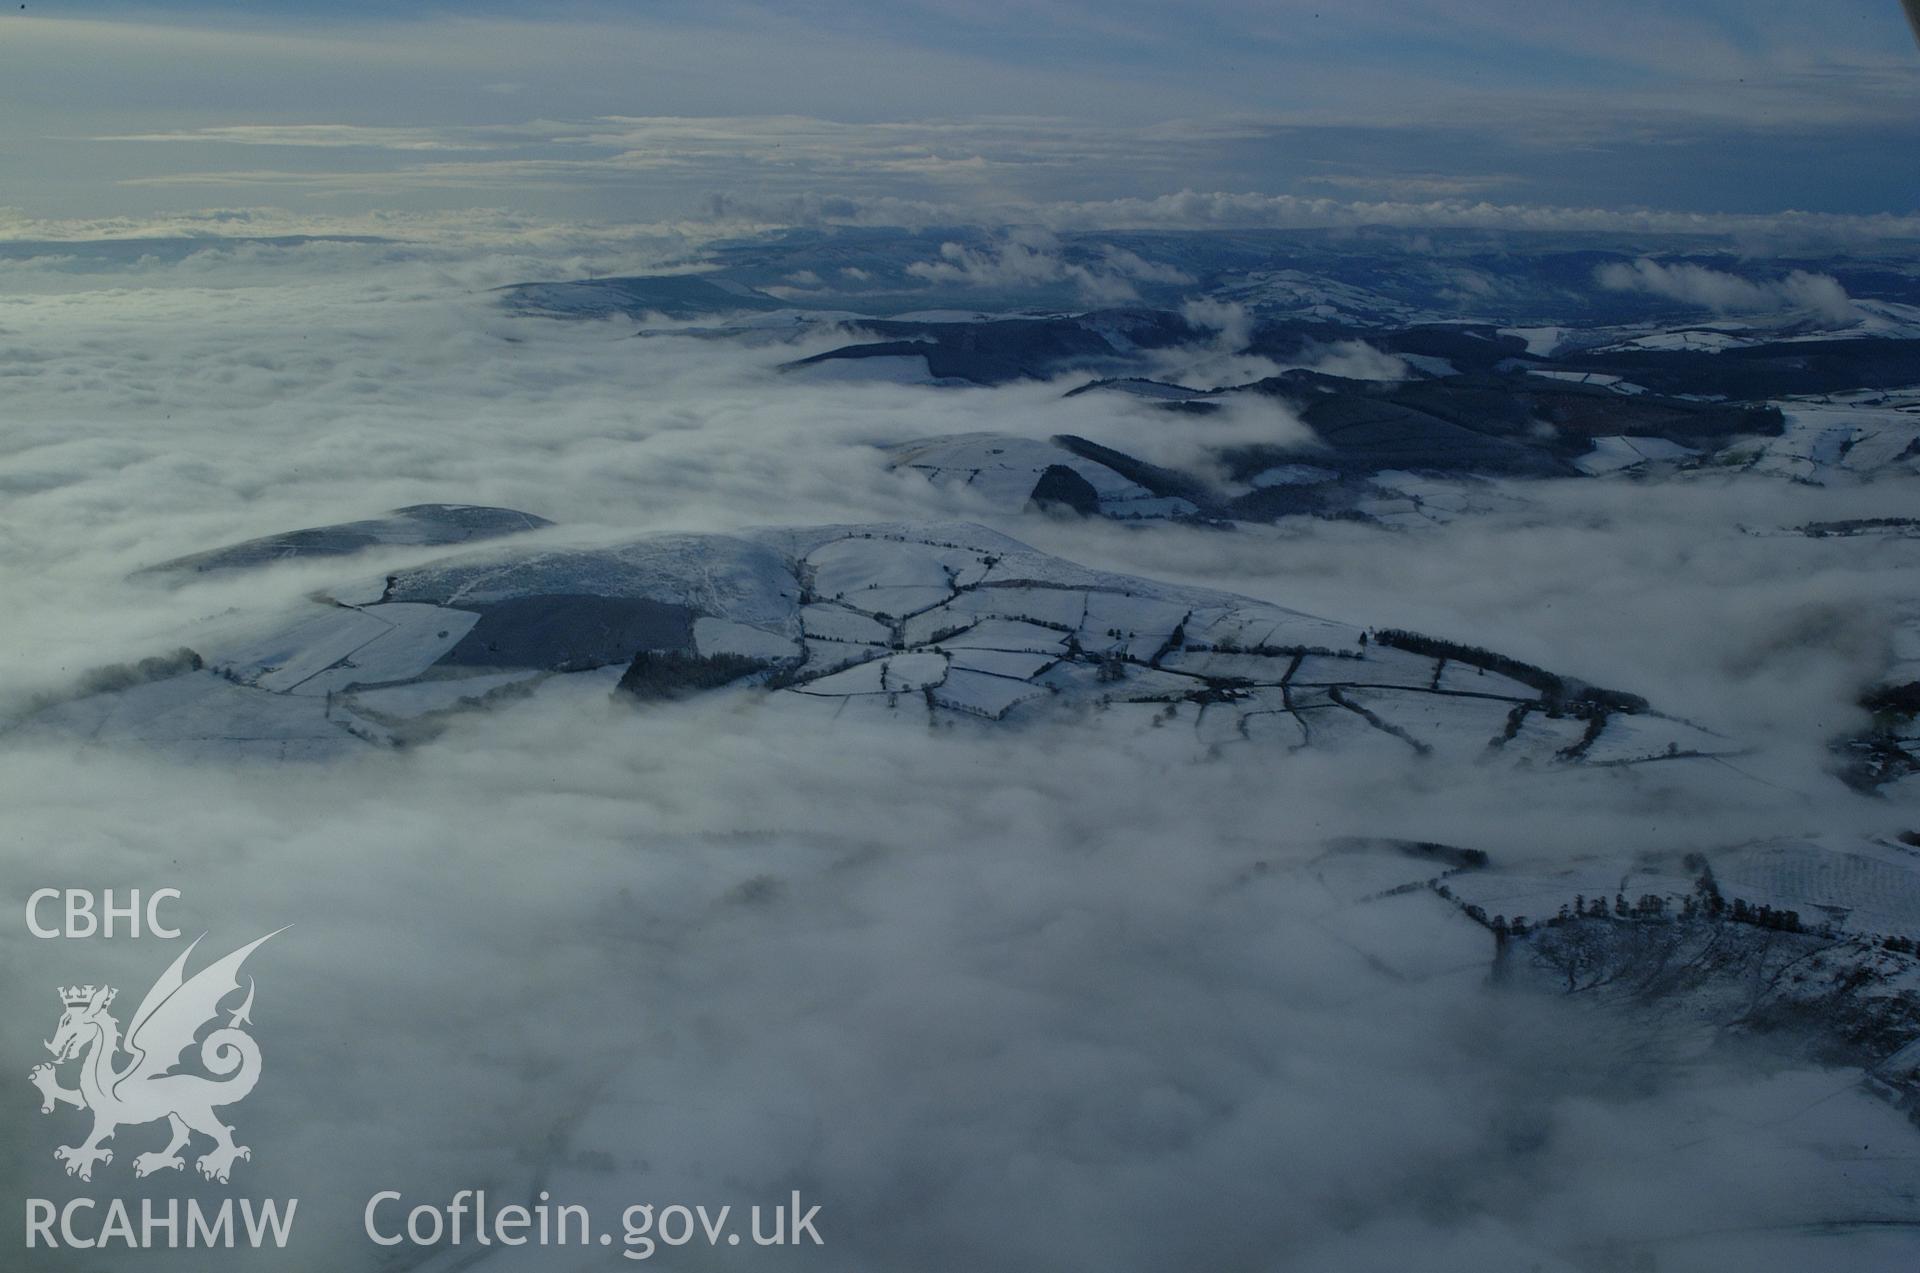 RCAHMW colour oblique aerial photograph of hills and commons south of Llananno, viewed from the north-east under snow and freezing fog. Taken on 19 November 2004 by Toby Driver